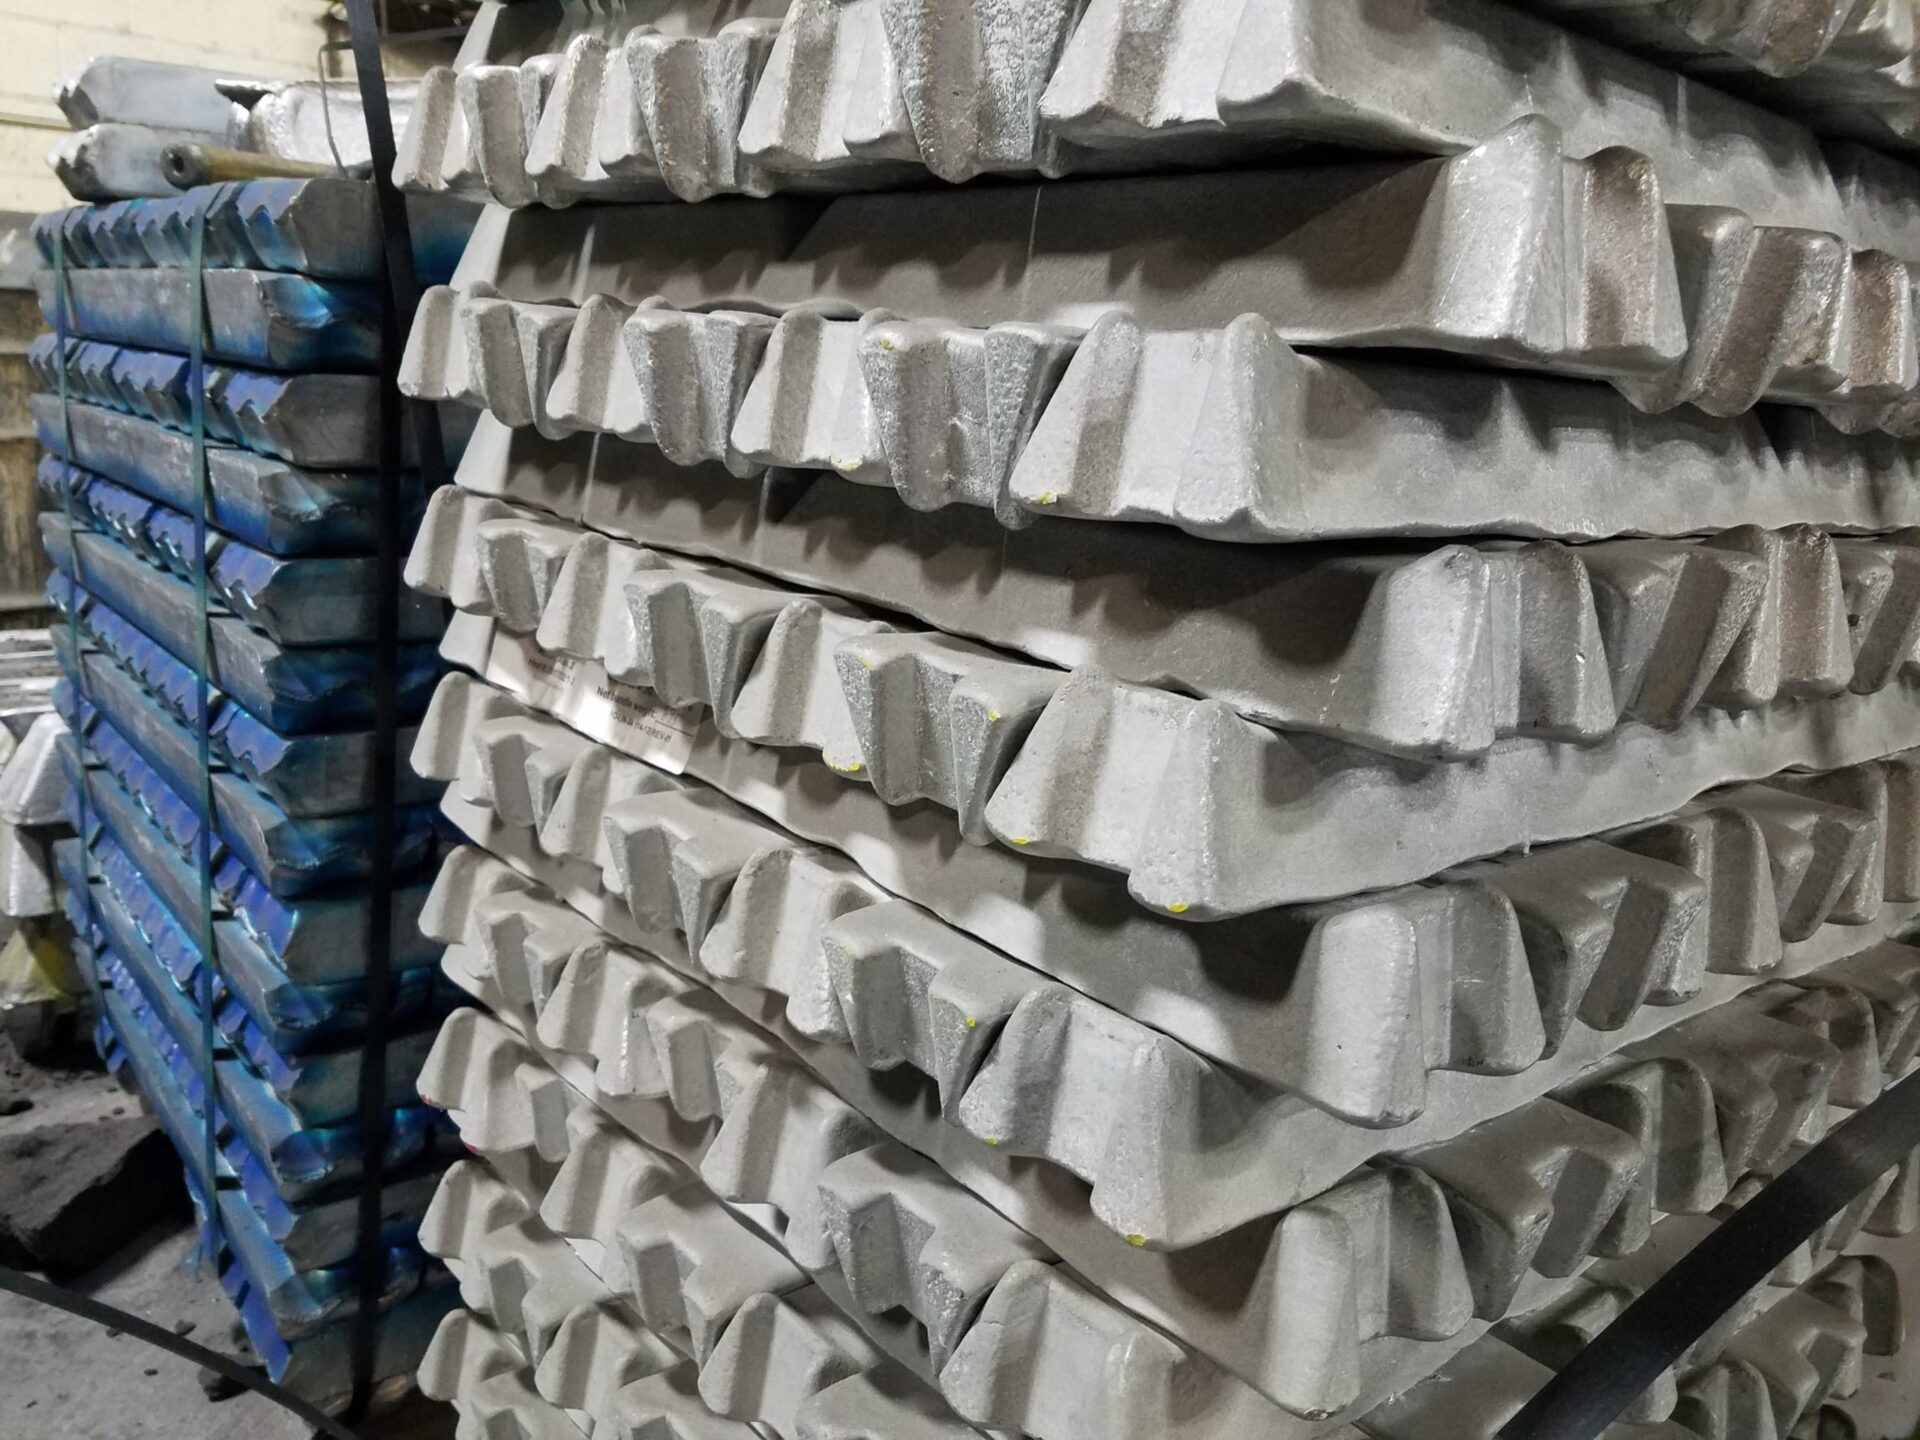 Stacks of silver and multicolor metal alloy ingots